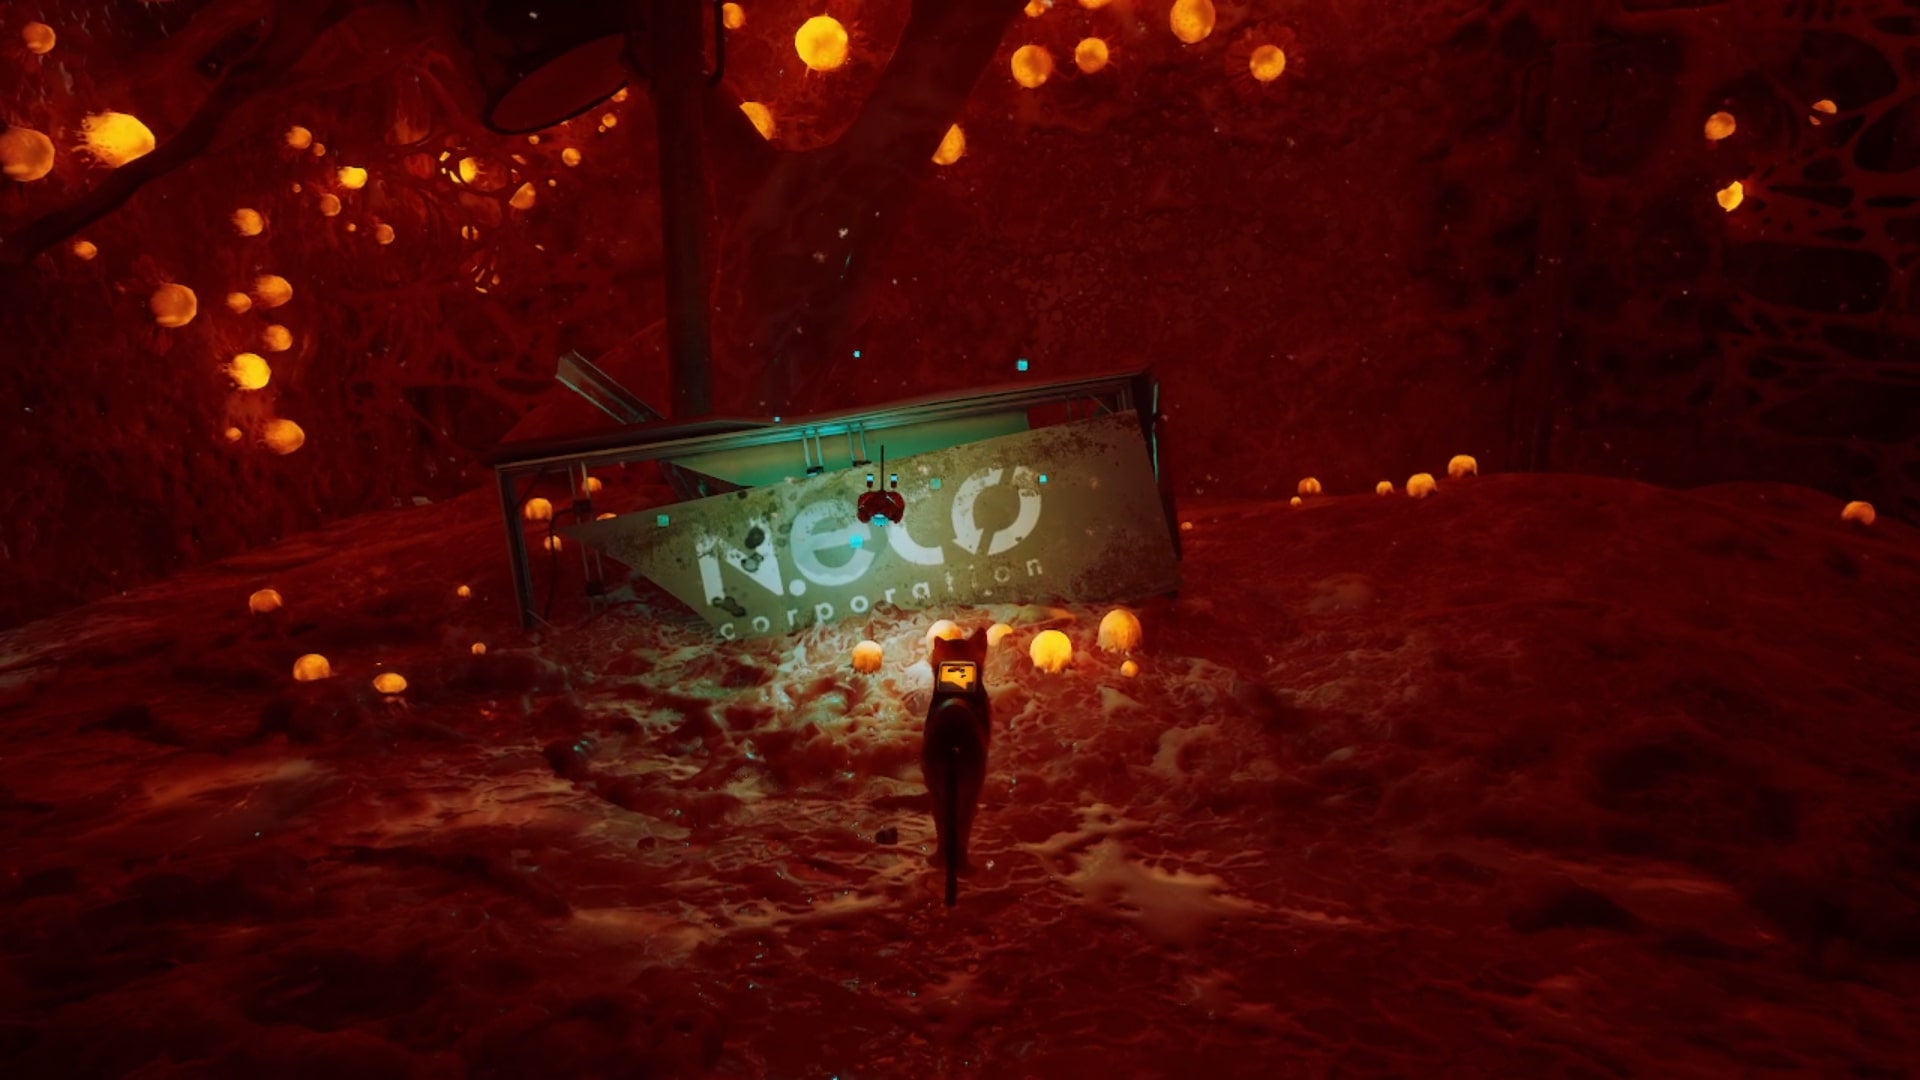 Stray memories guide: The eponymous stray and B-12 observing the crumbling Neco Corp billboard that's being slowly swallowed by Zurk eggs and strange flesh